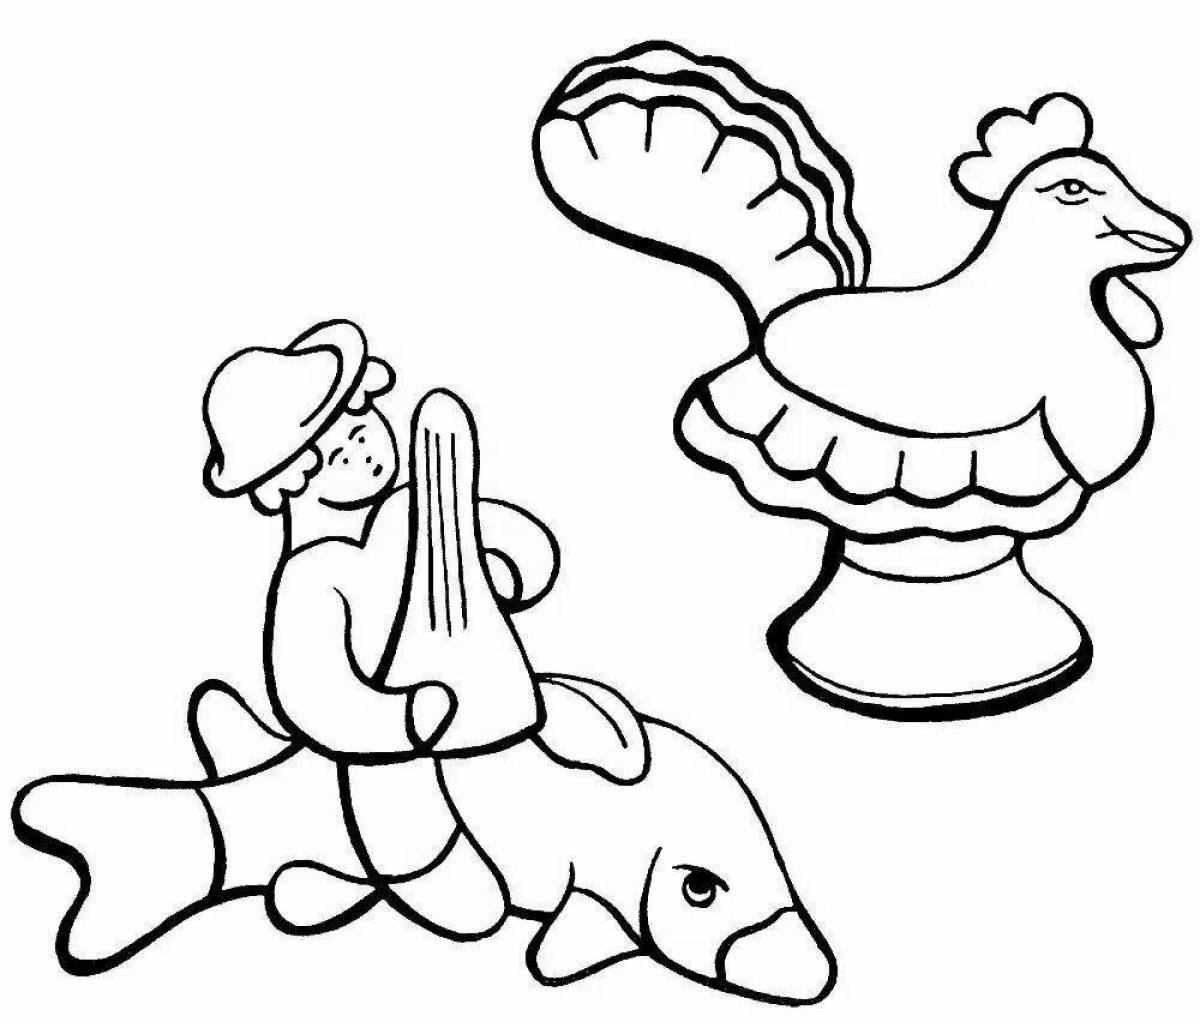 Coloring book magic Dymkovo toy duck